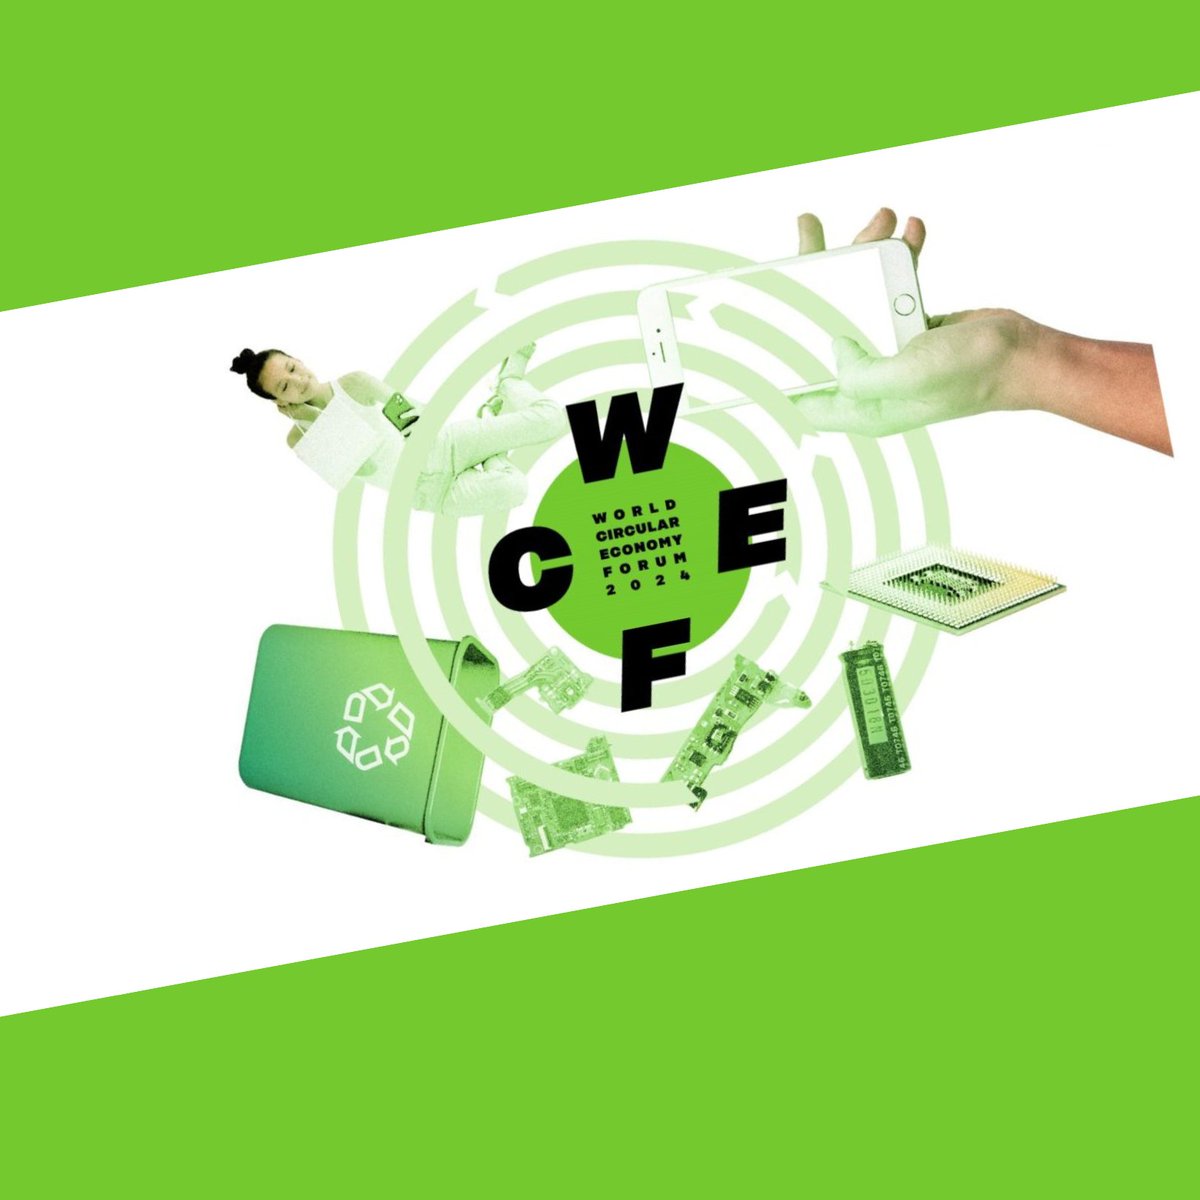 WCEF2024 is built in collaboration with organisations from business, finance, public policy, research, innovation and education, contributing to the #CircularEconomy. Get to know their partners and join #WCEF2024 on 15–18 April! @SitraFund @WCEF2024 @circleeconomy